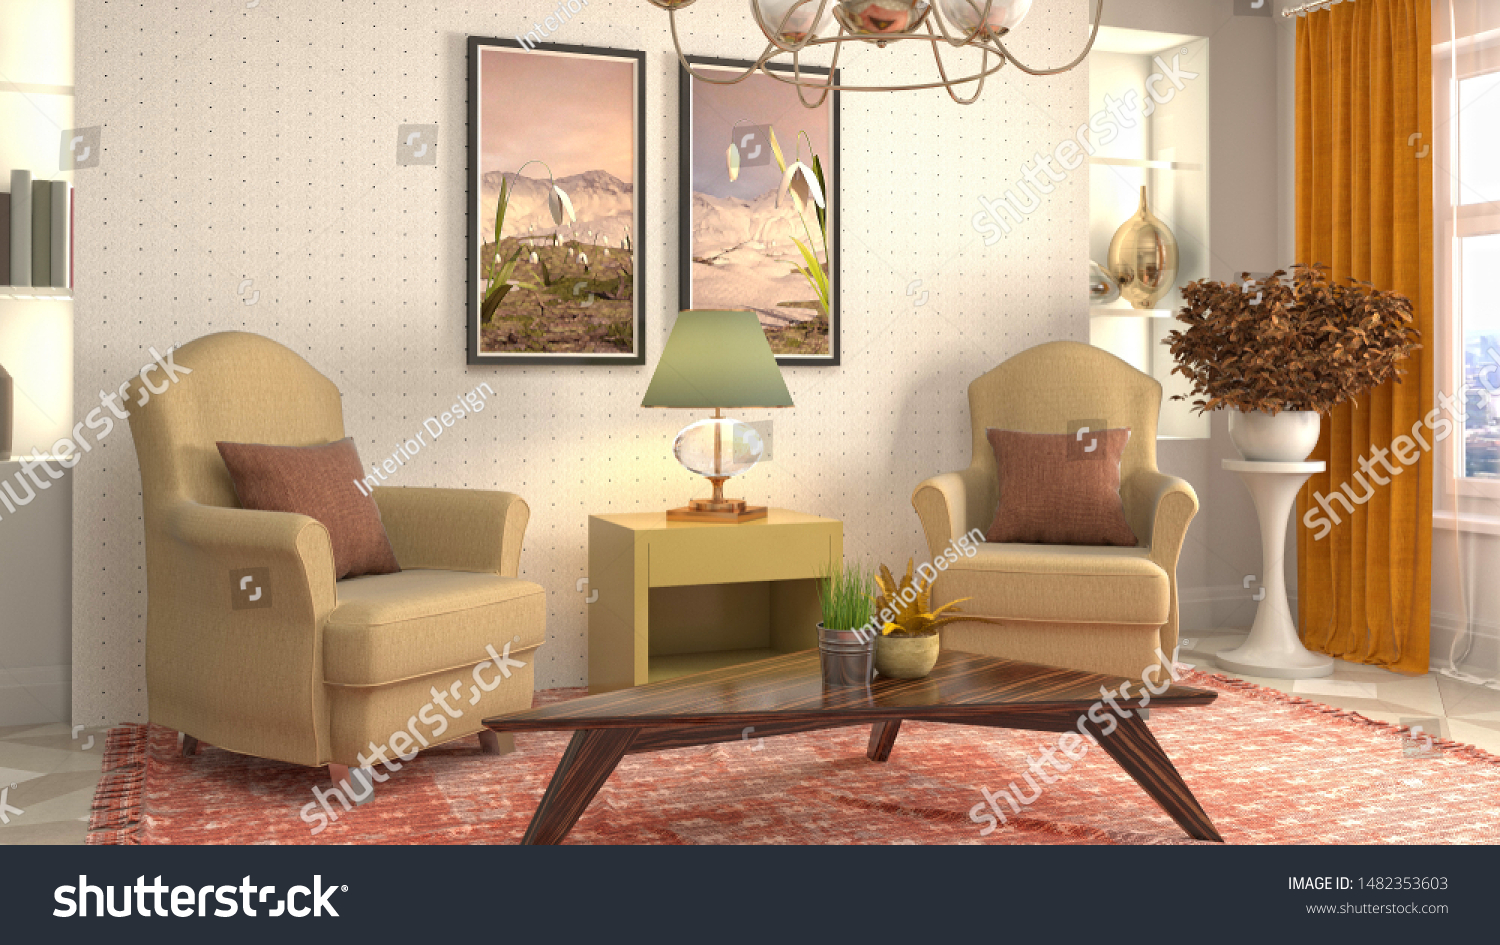 interior with chair. 3d illustration. #1482353603